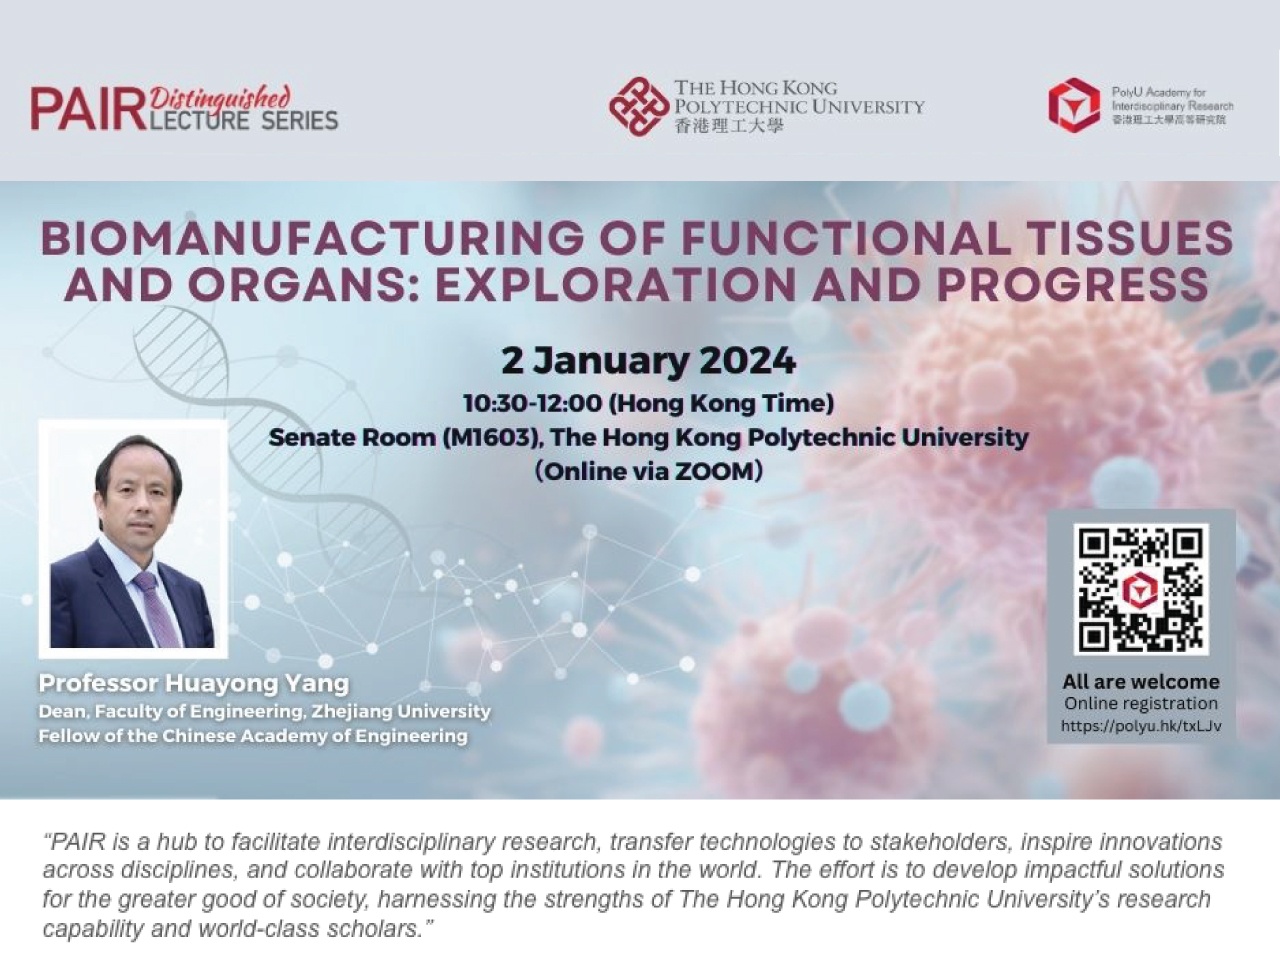 PAIR distinguished lecture series: biomanufacturing of functional tissues and organs: exploration and progress